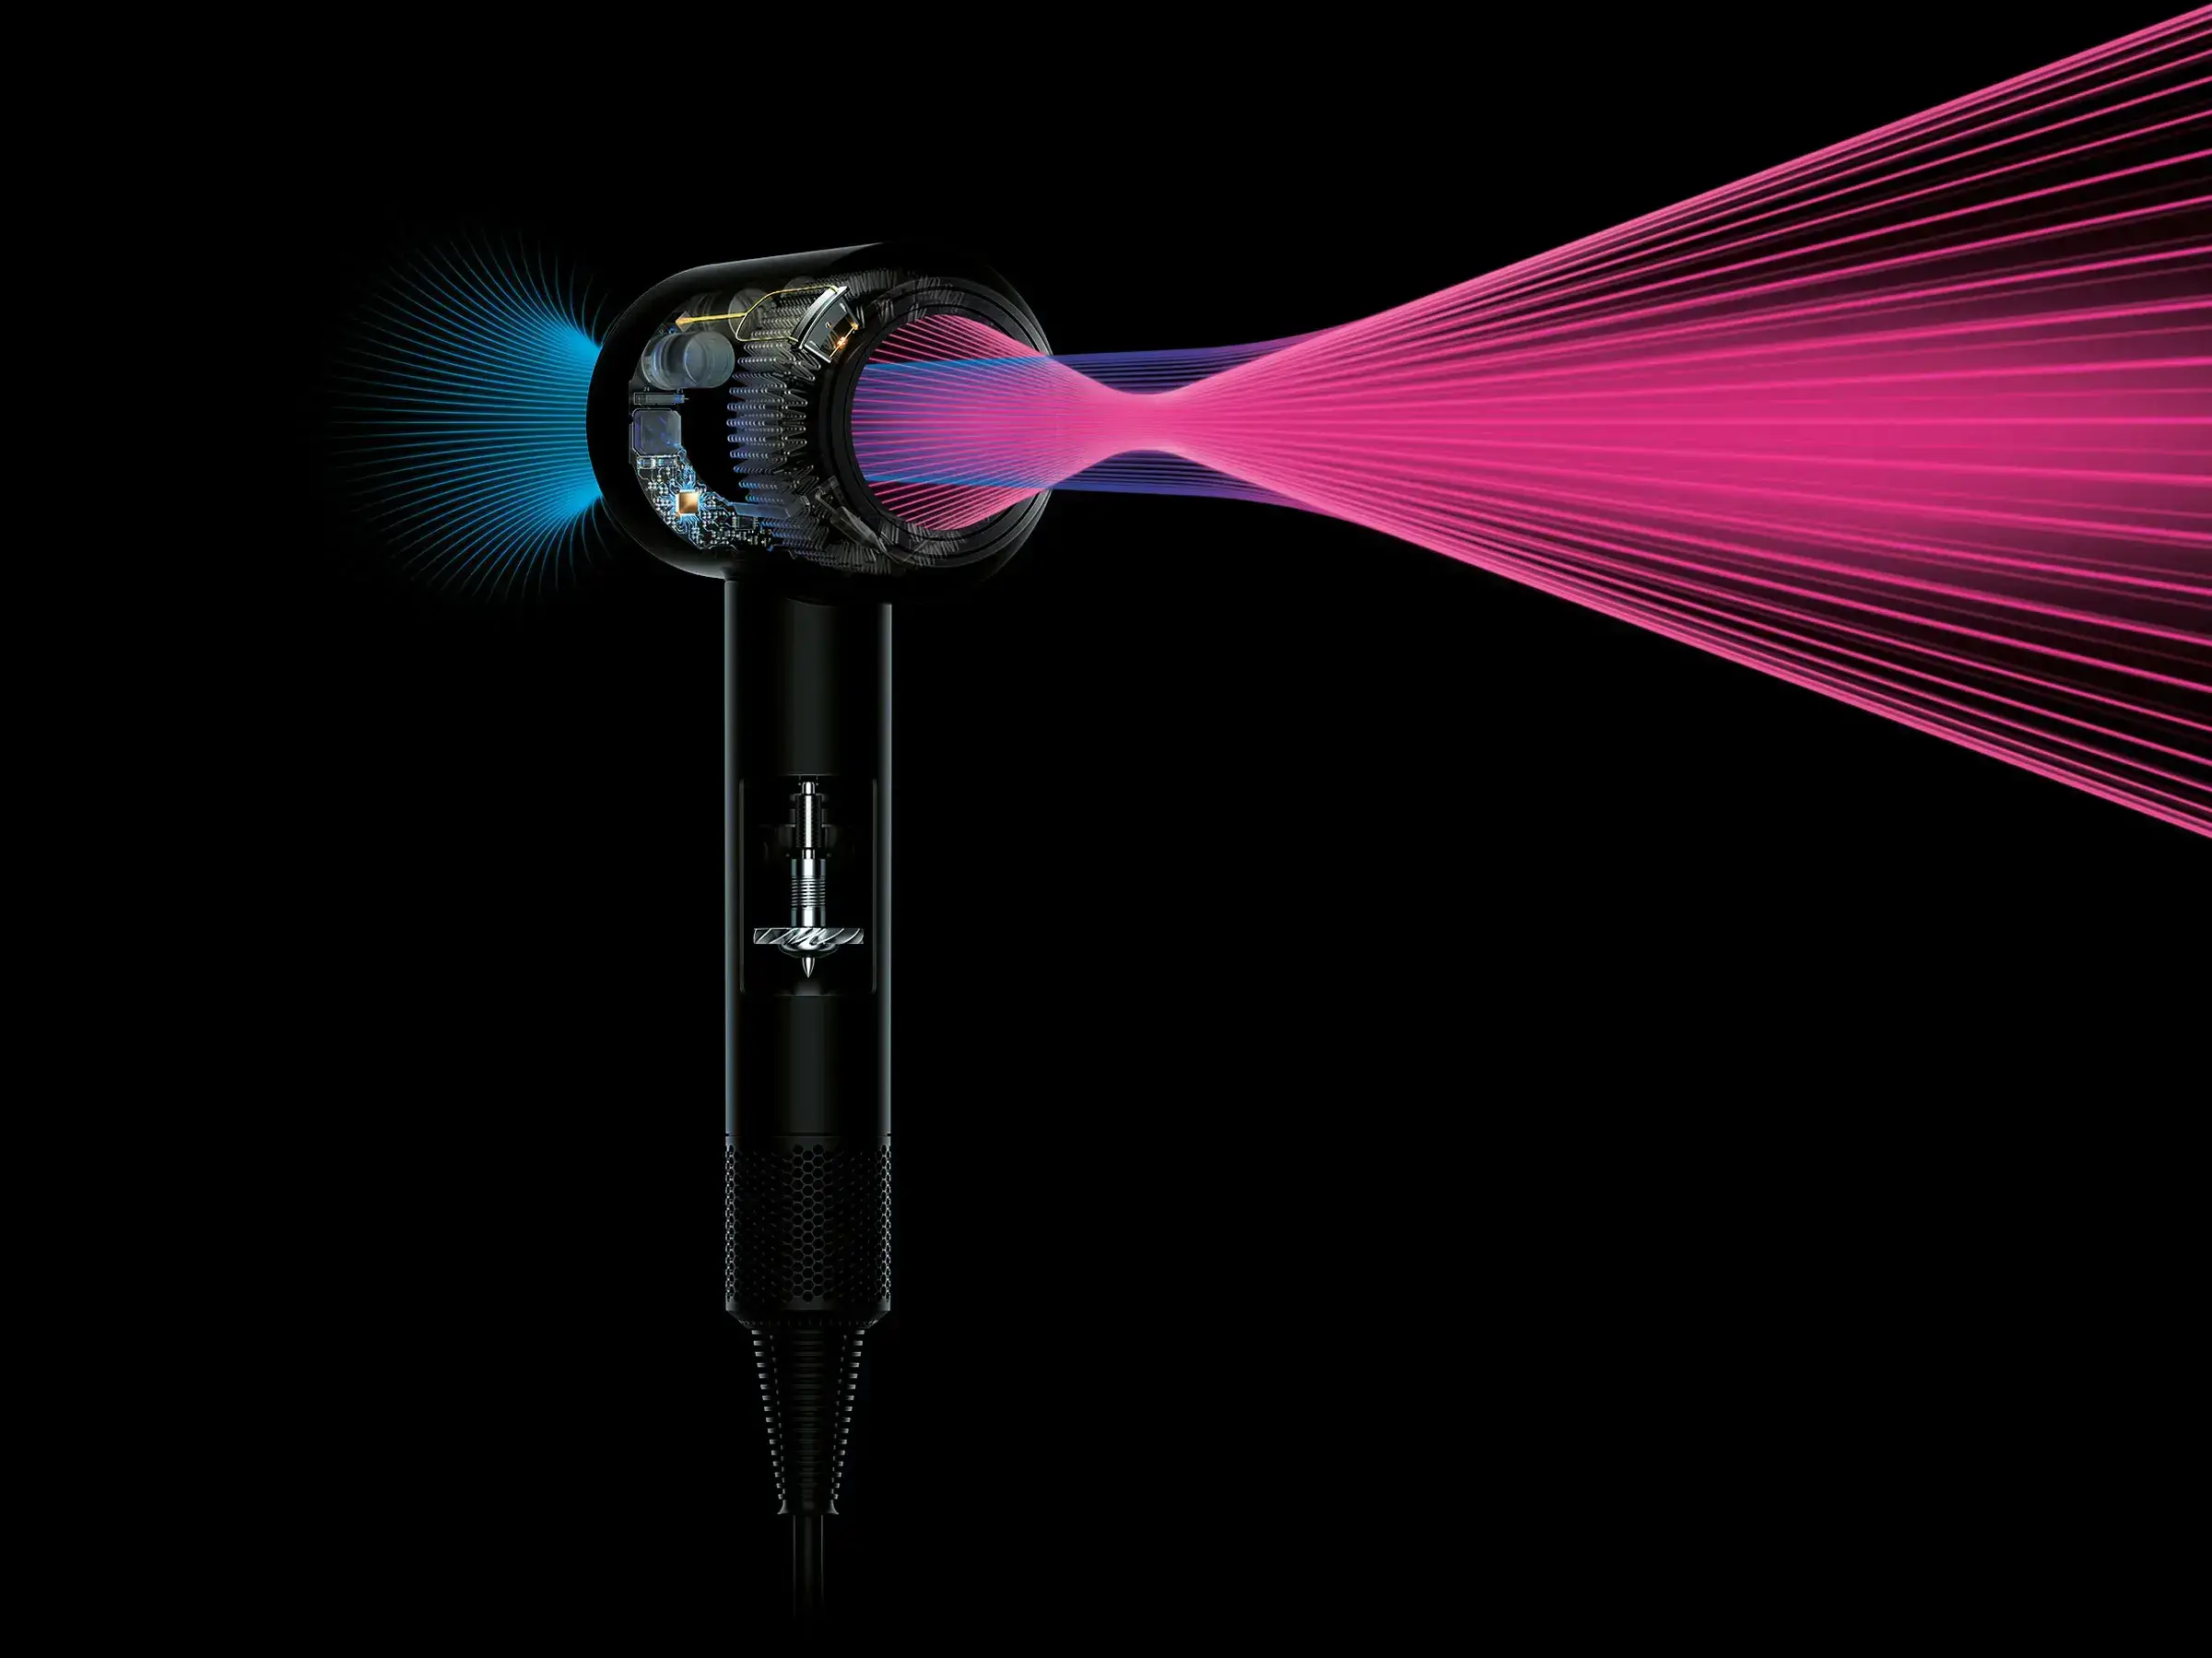 Ionic hair dryer with airflow visualization, technology emphasis.